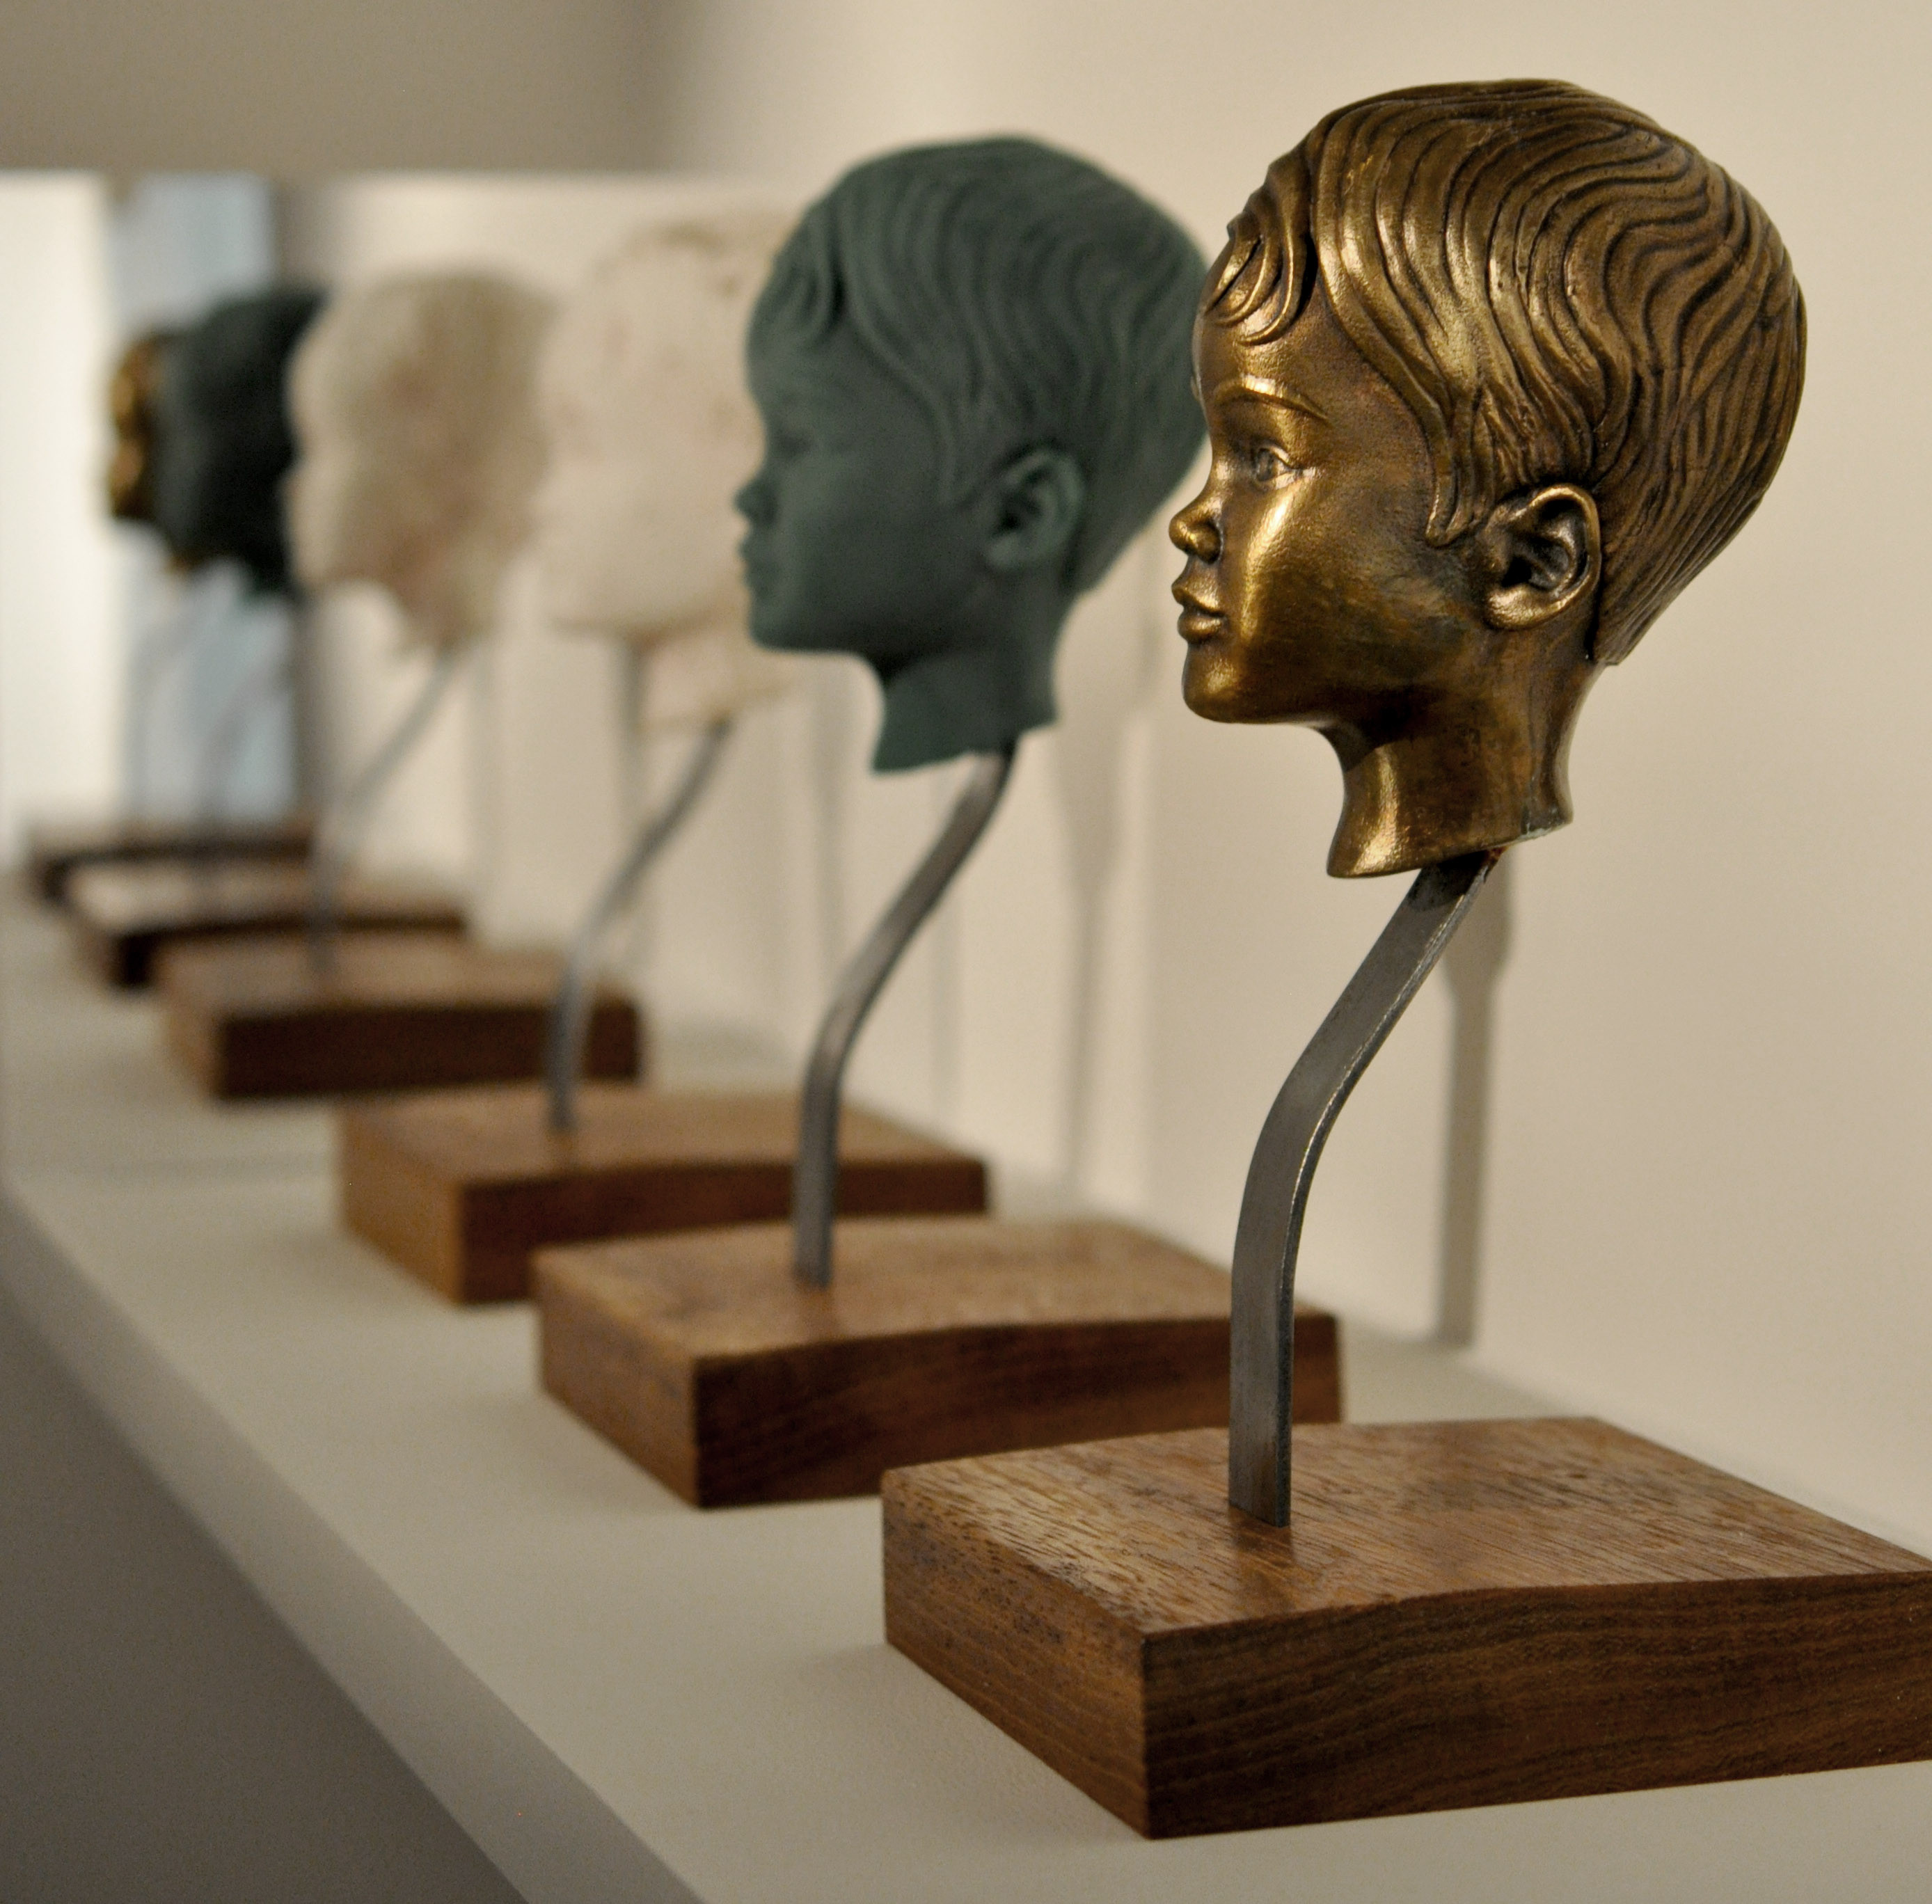 Bronze, wax and 3D printed variations of bust.